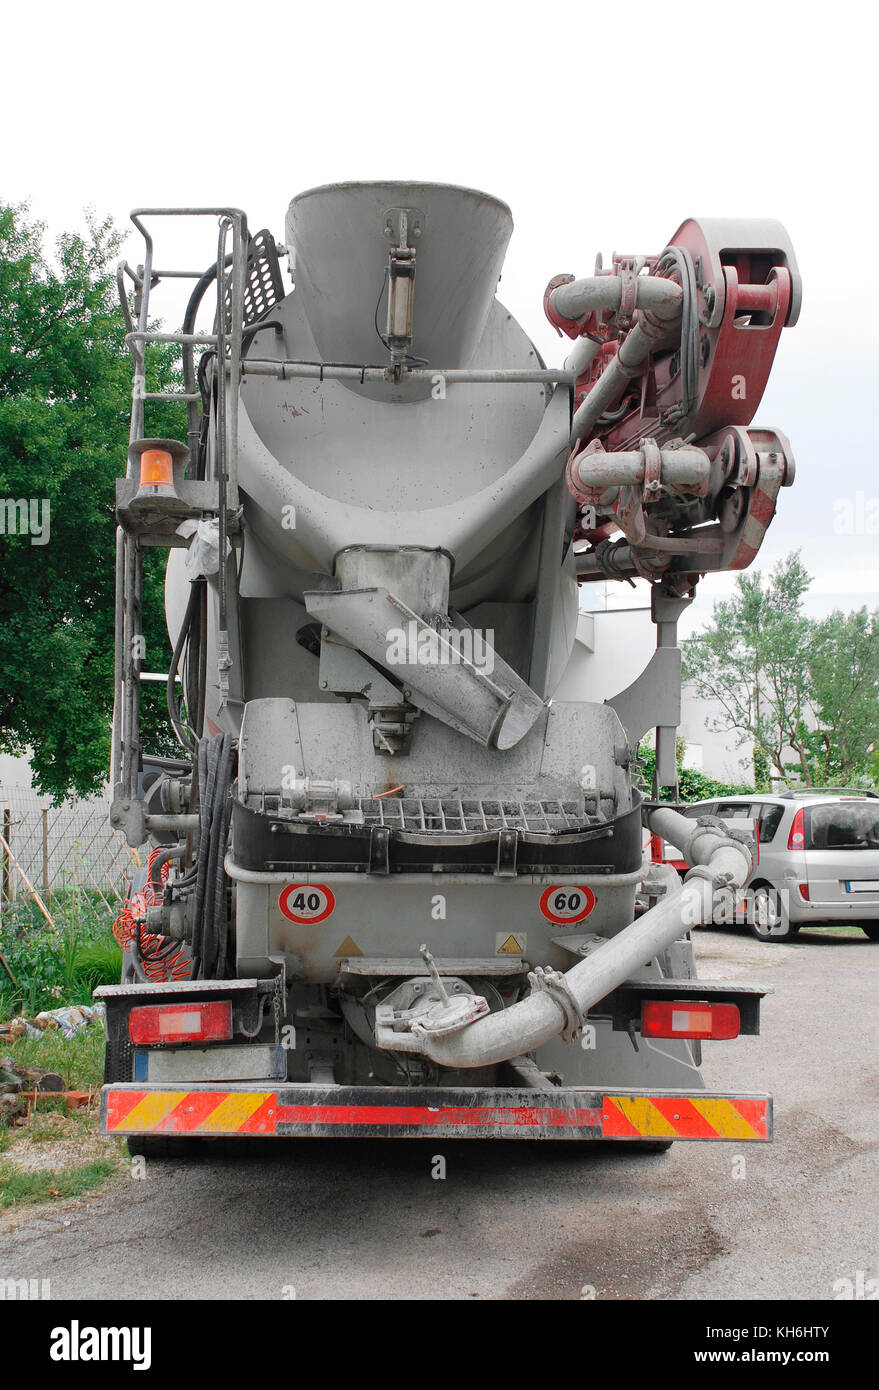 https://c8.alamy.com/comp/KH6HTY/a-concrete-mixer-truck-delivering-concrete-to-a-small-domestic-building-KH6HTY.jpg